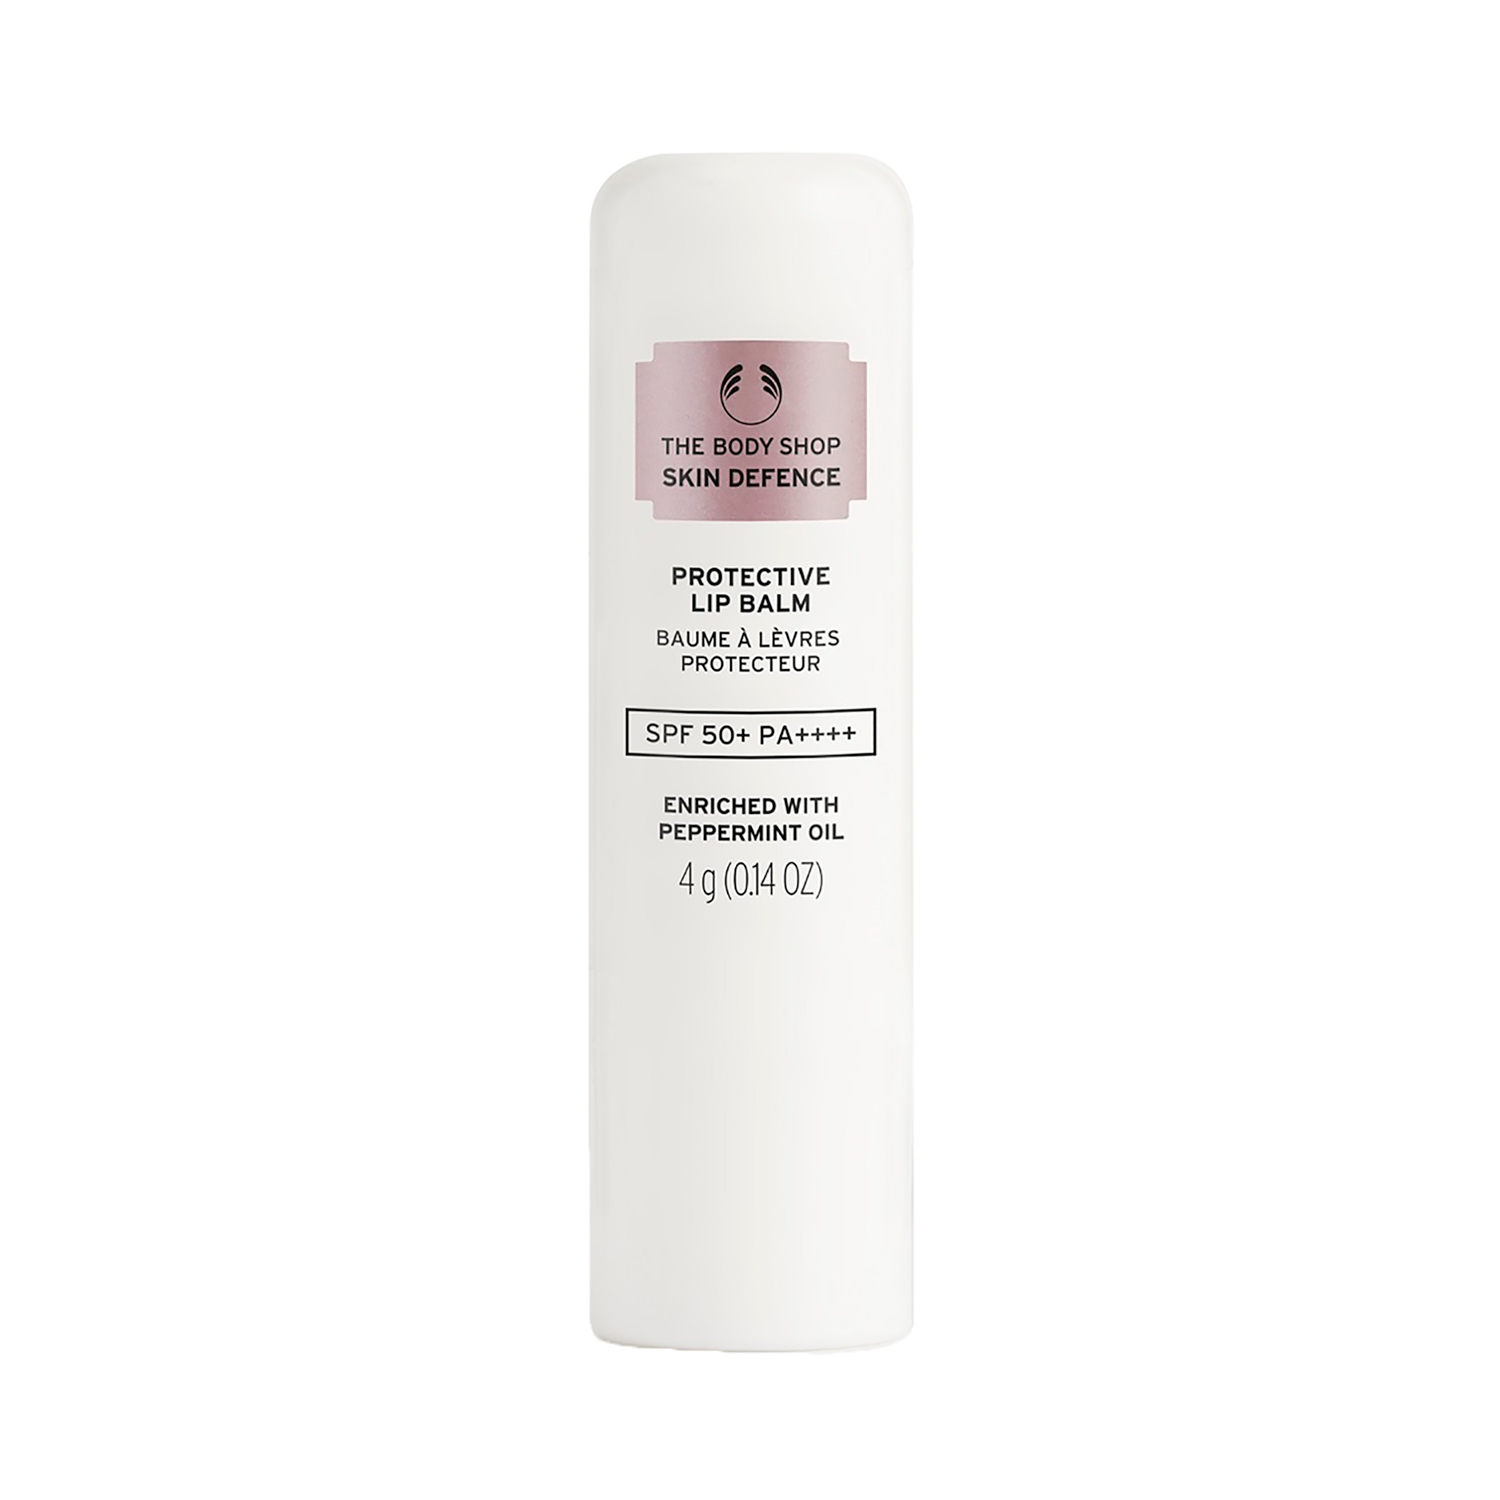 The Body Shop | The Body Shop Skin Defence Protective Lip Balm SPF 50+ PA++++ (4g)